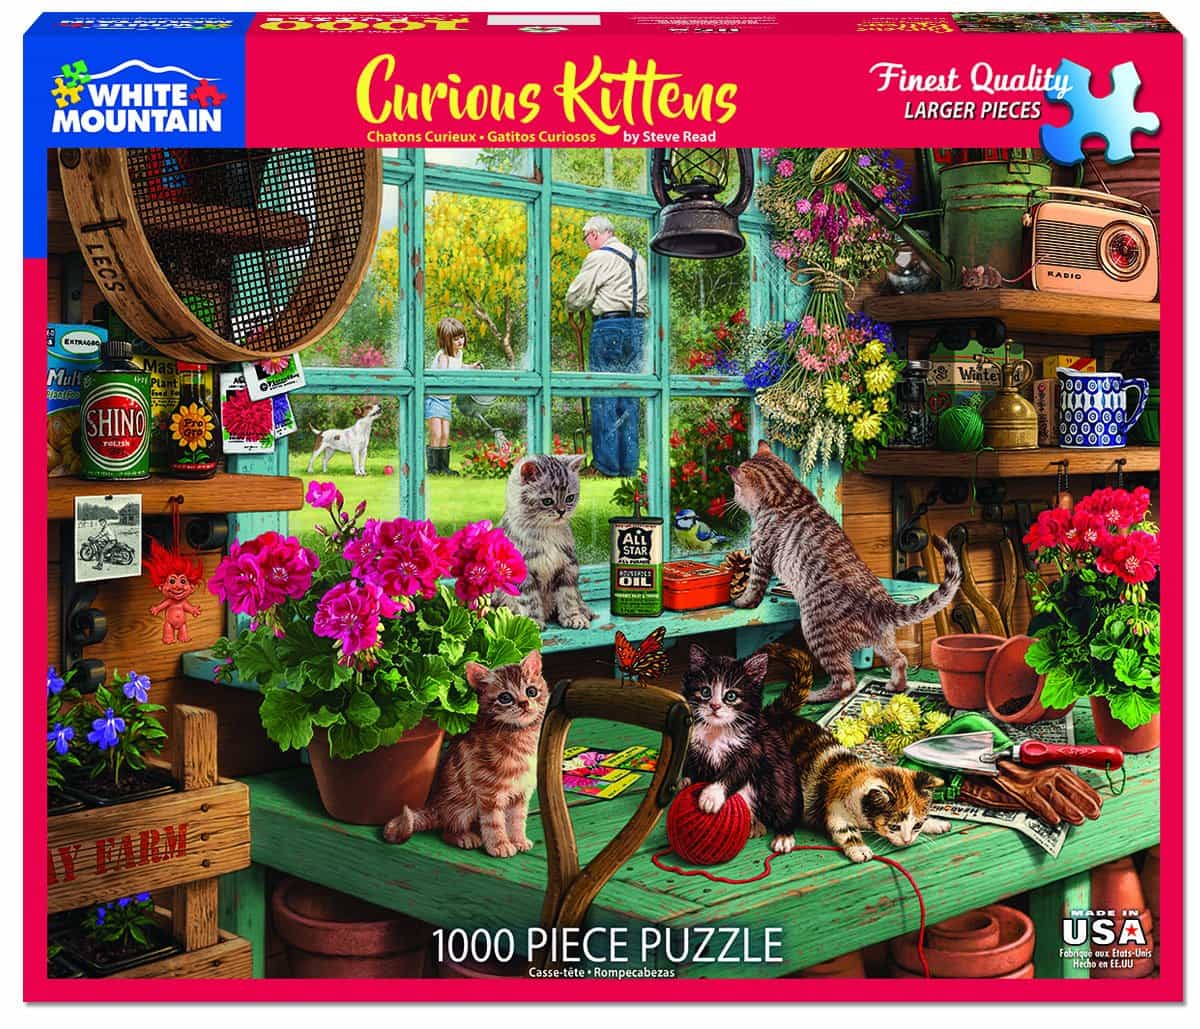 1000-piece-jigsaw-puzzle-curious-kittens-white-mountain-puzzles